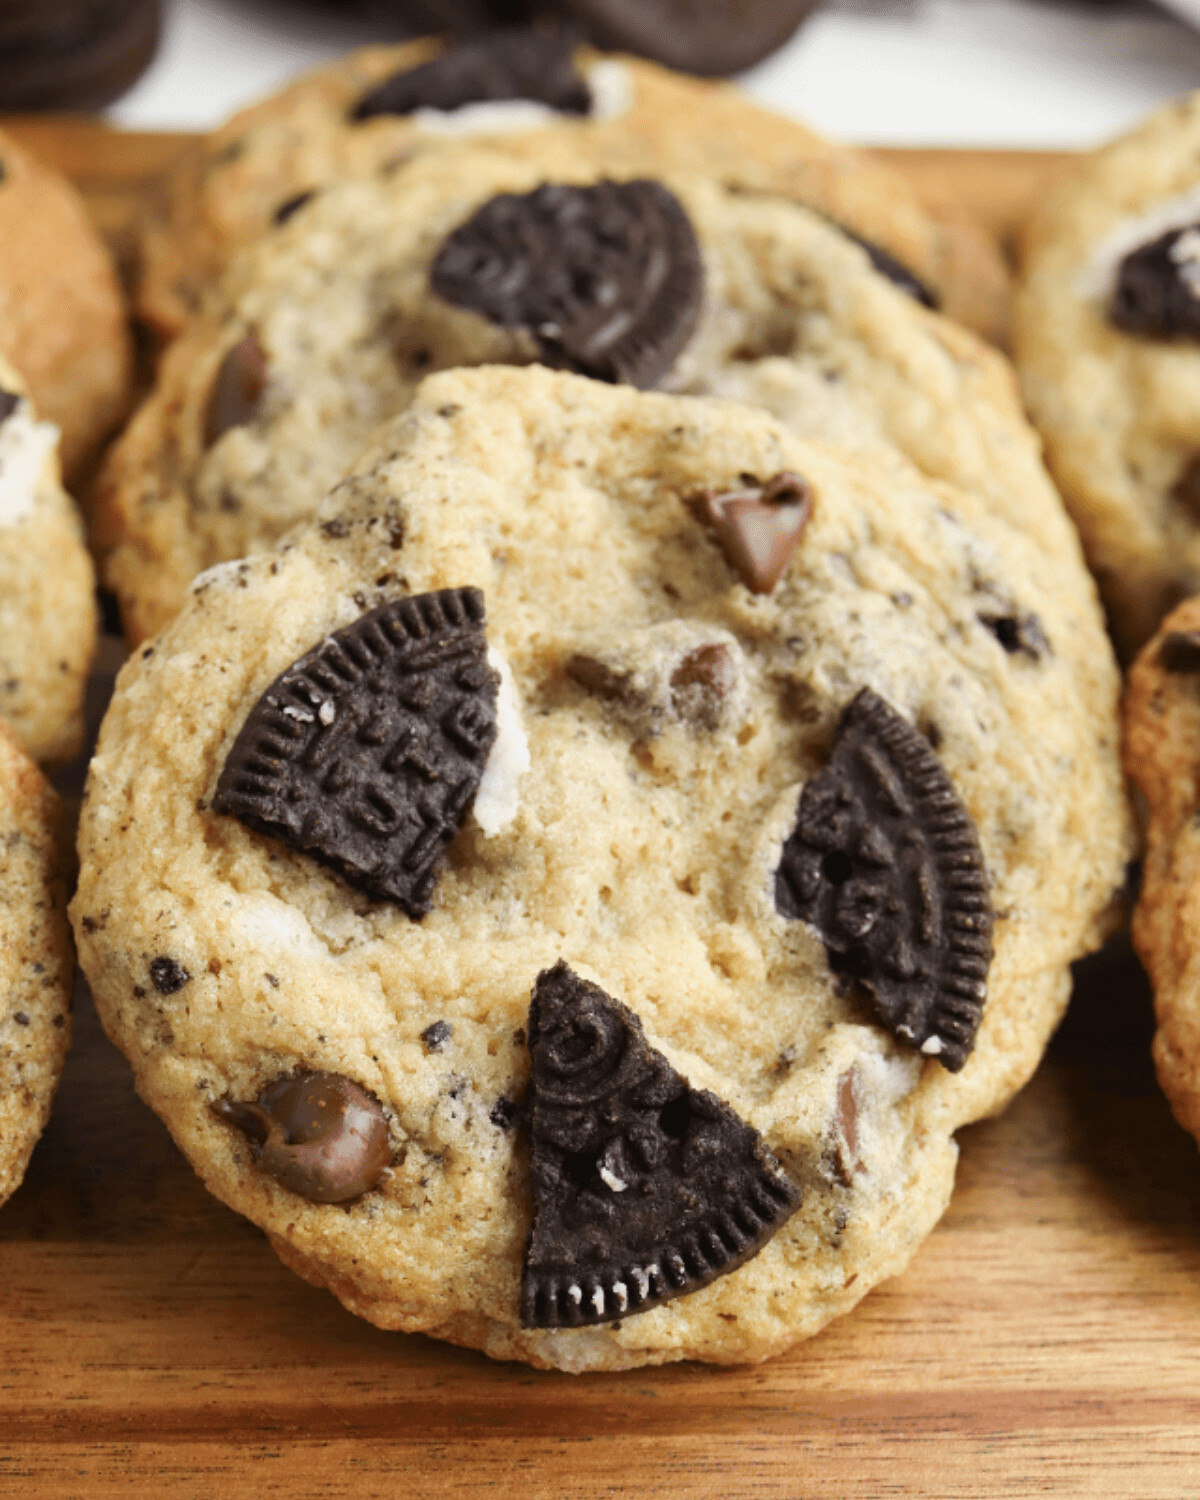 An oreo chocolate chips cookie close up.